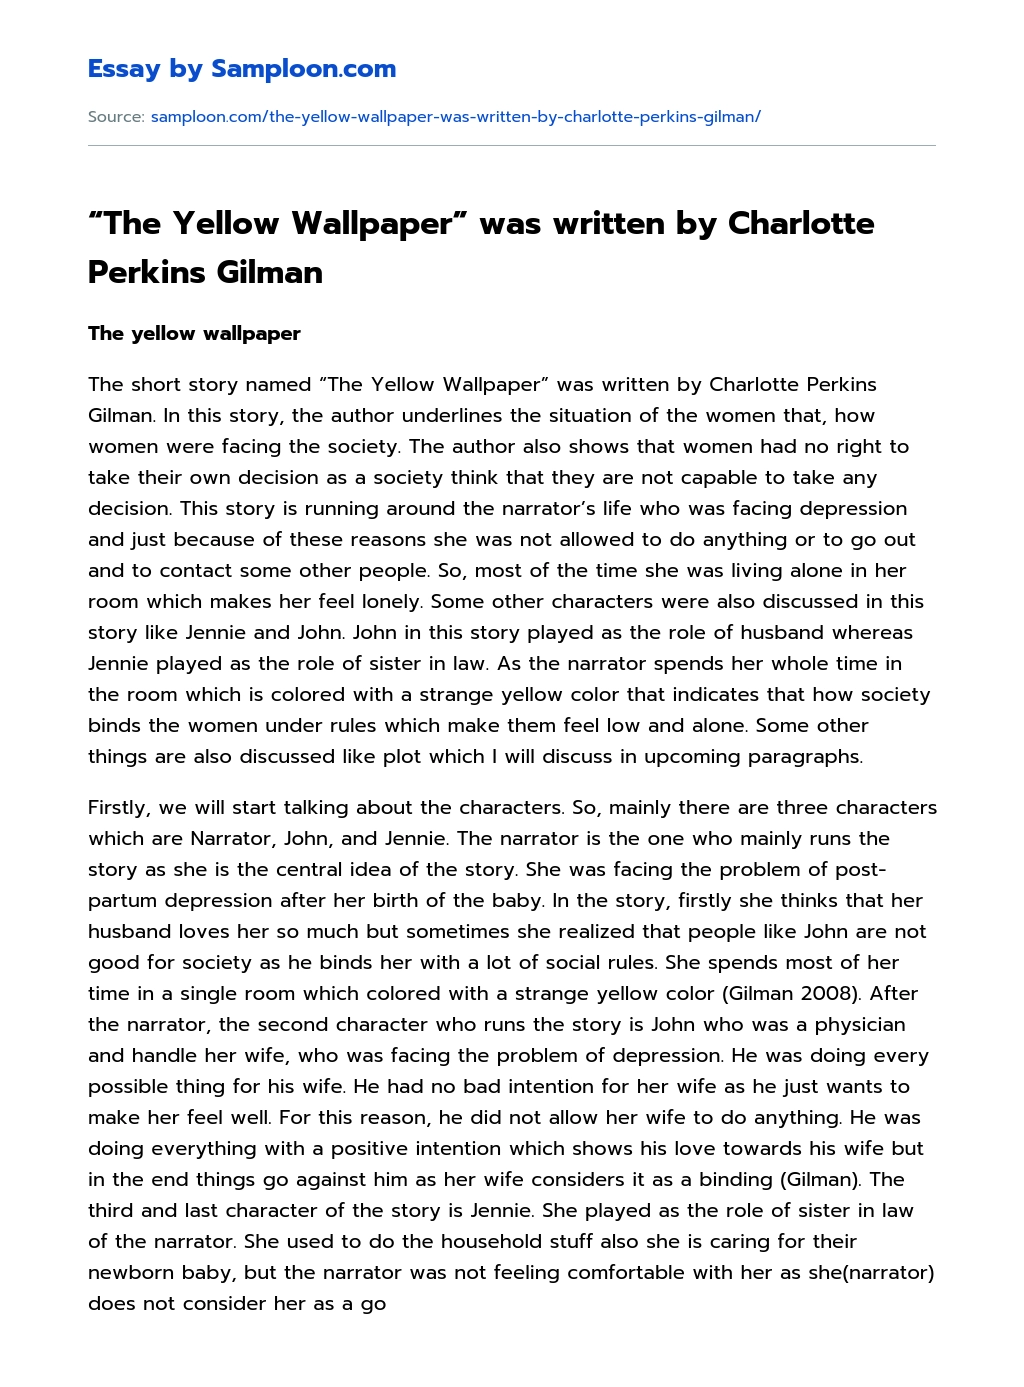 “The Yellow Wallpaper” by Charlotte Perkins Gilman Summary essay